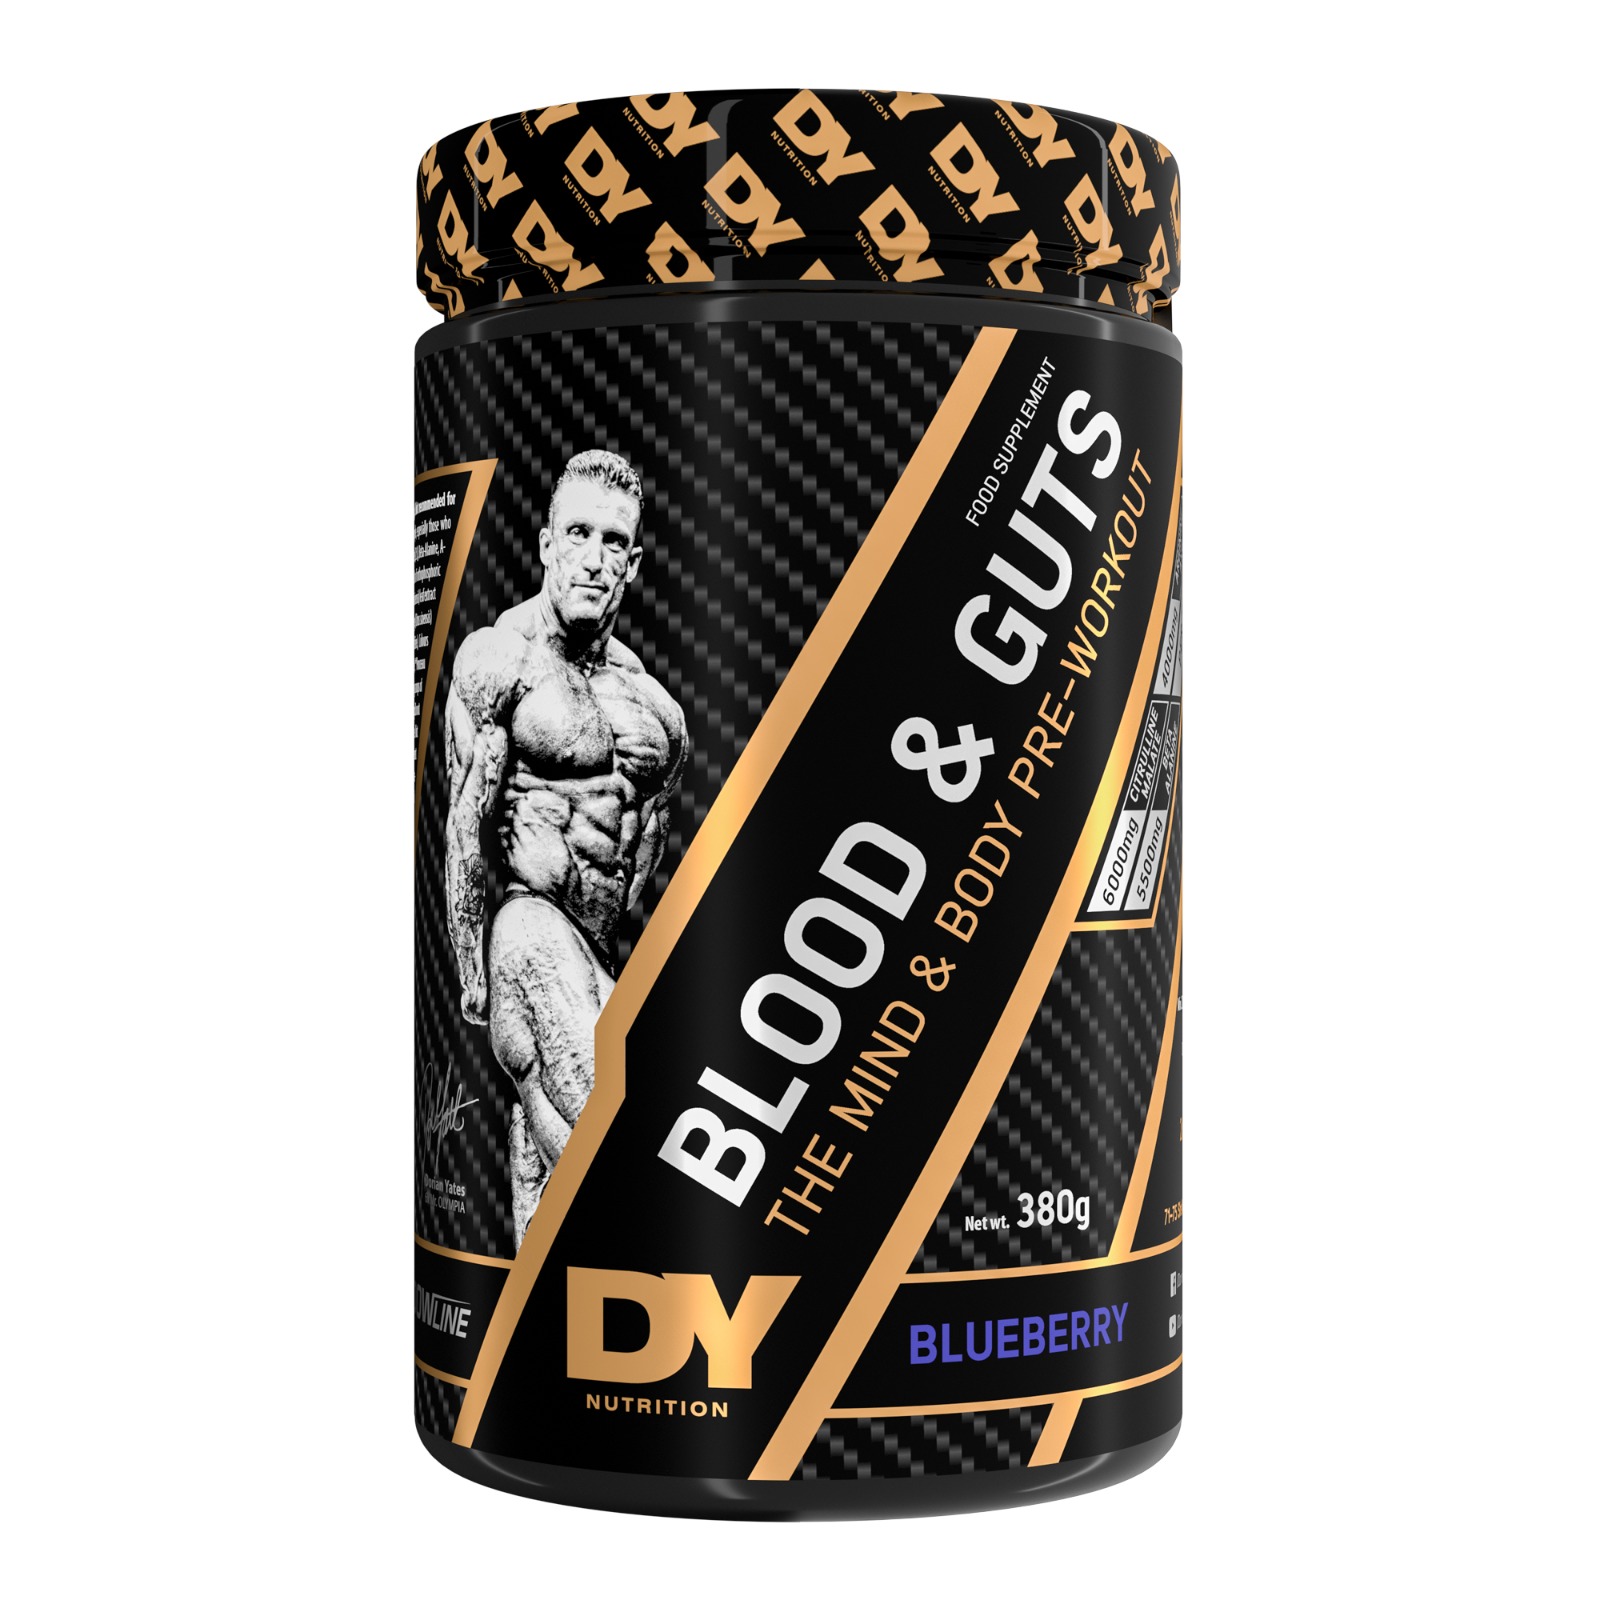 DY Blood & Guts High Quality Supplements in Sri Lanka